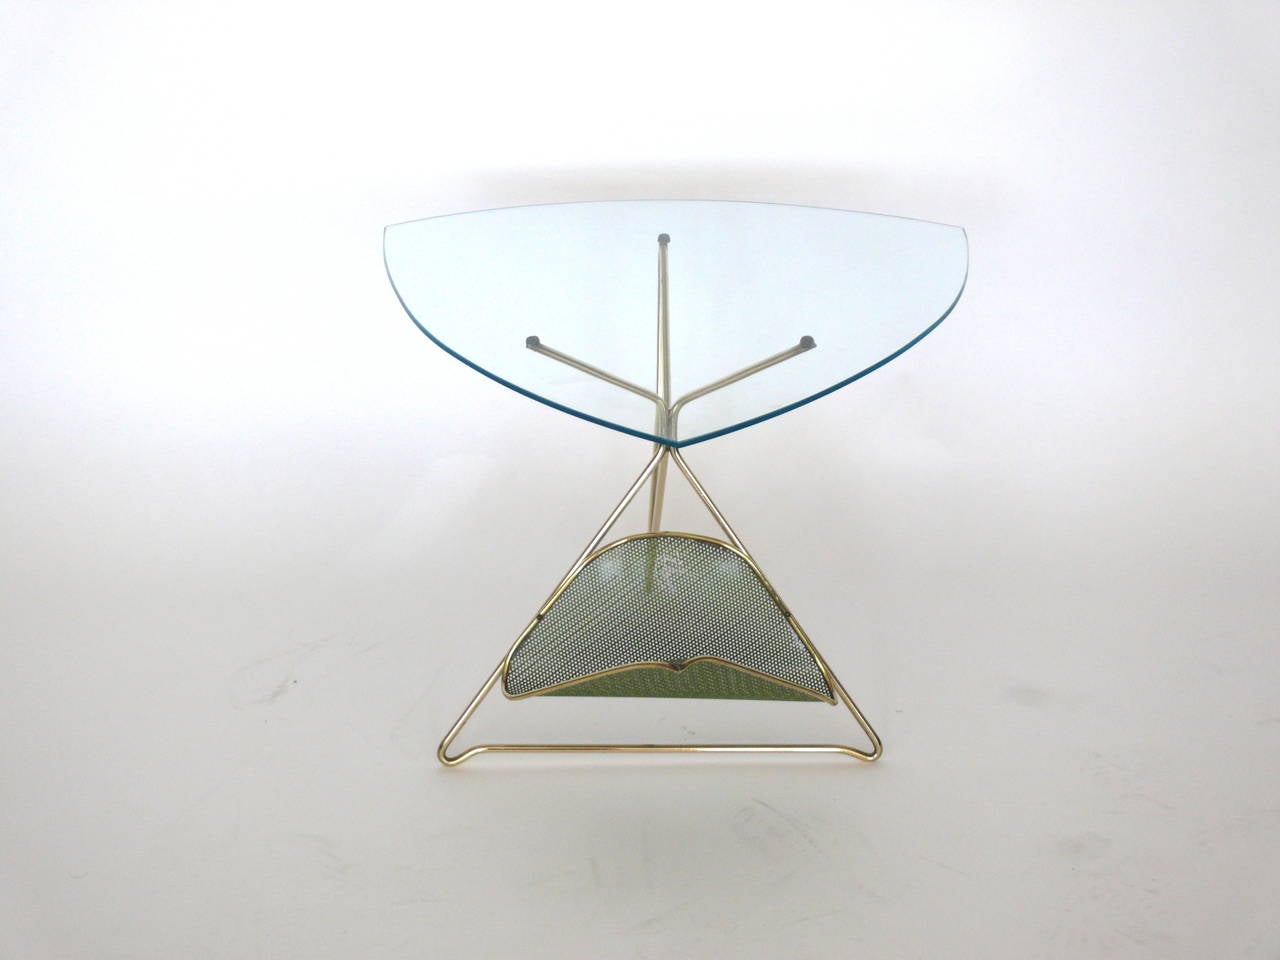 Handsome French side table by Mathieu Matégot. Brass and perforated metal table with triangular glass top. Fantastic lines and beautiful design. Excellent vintage condition. 